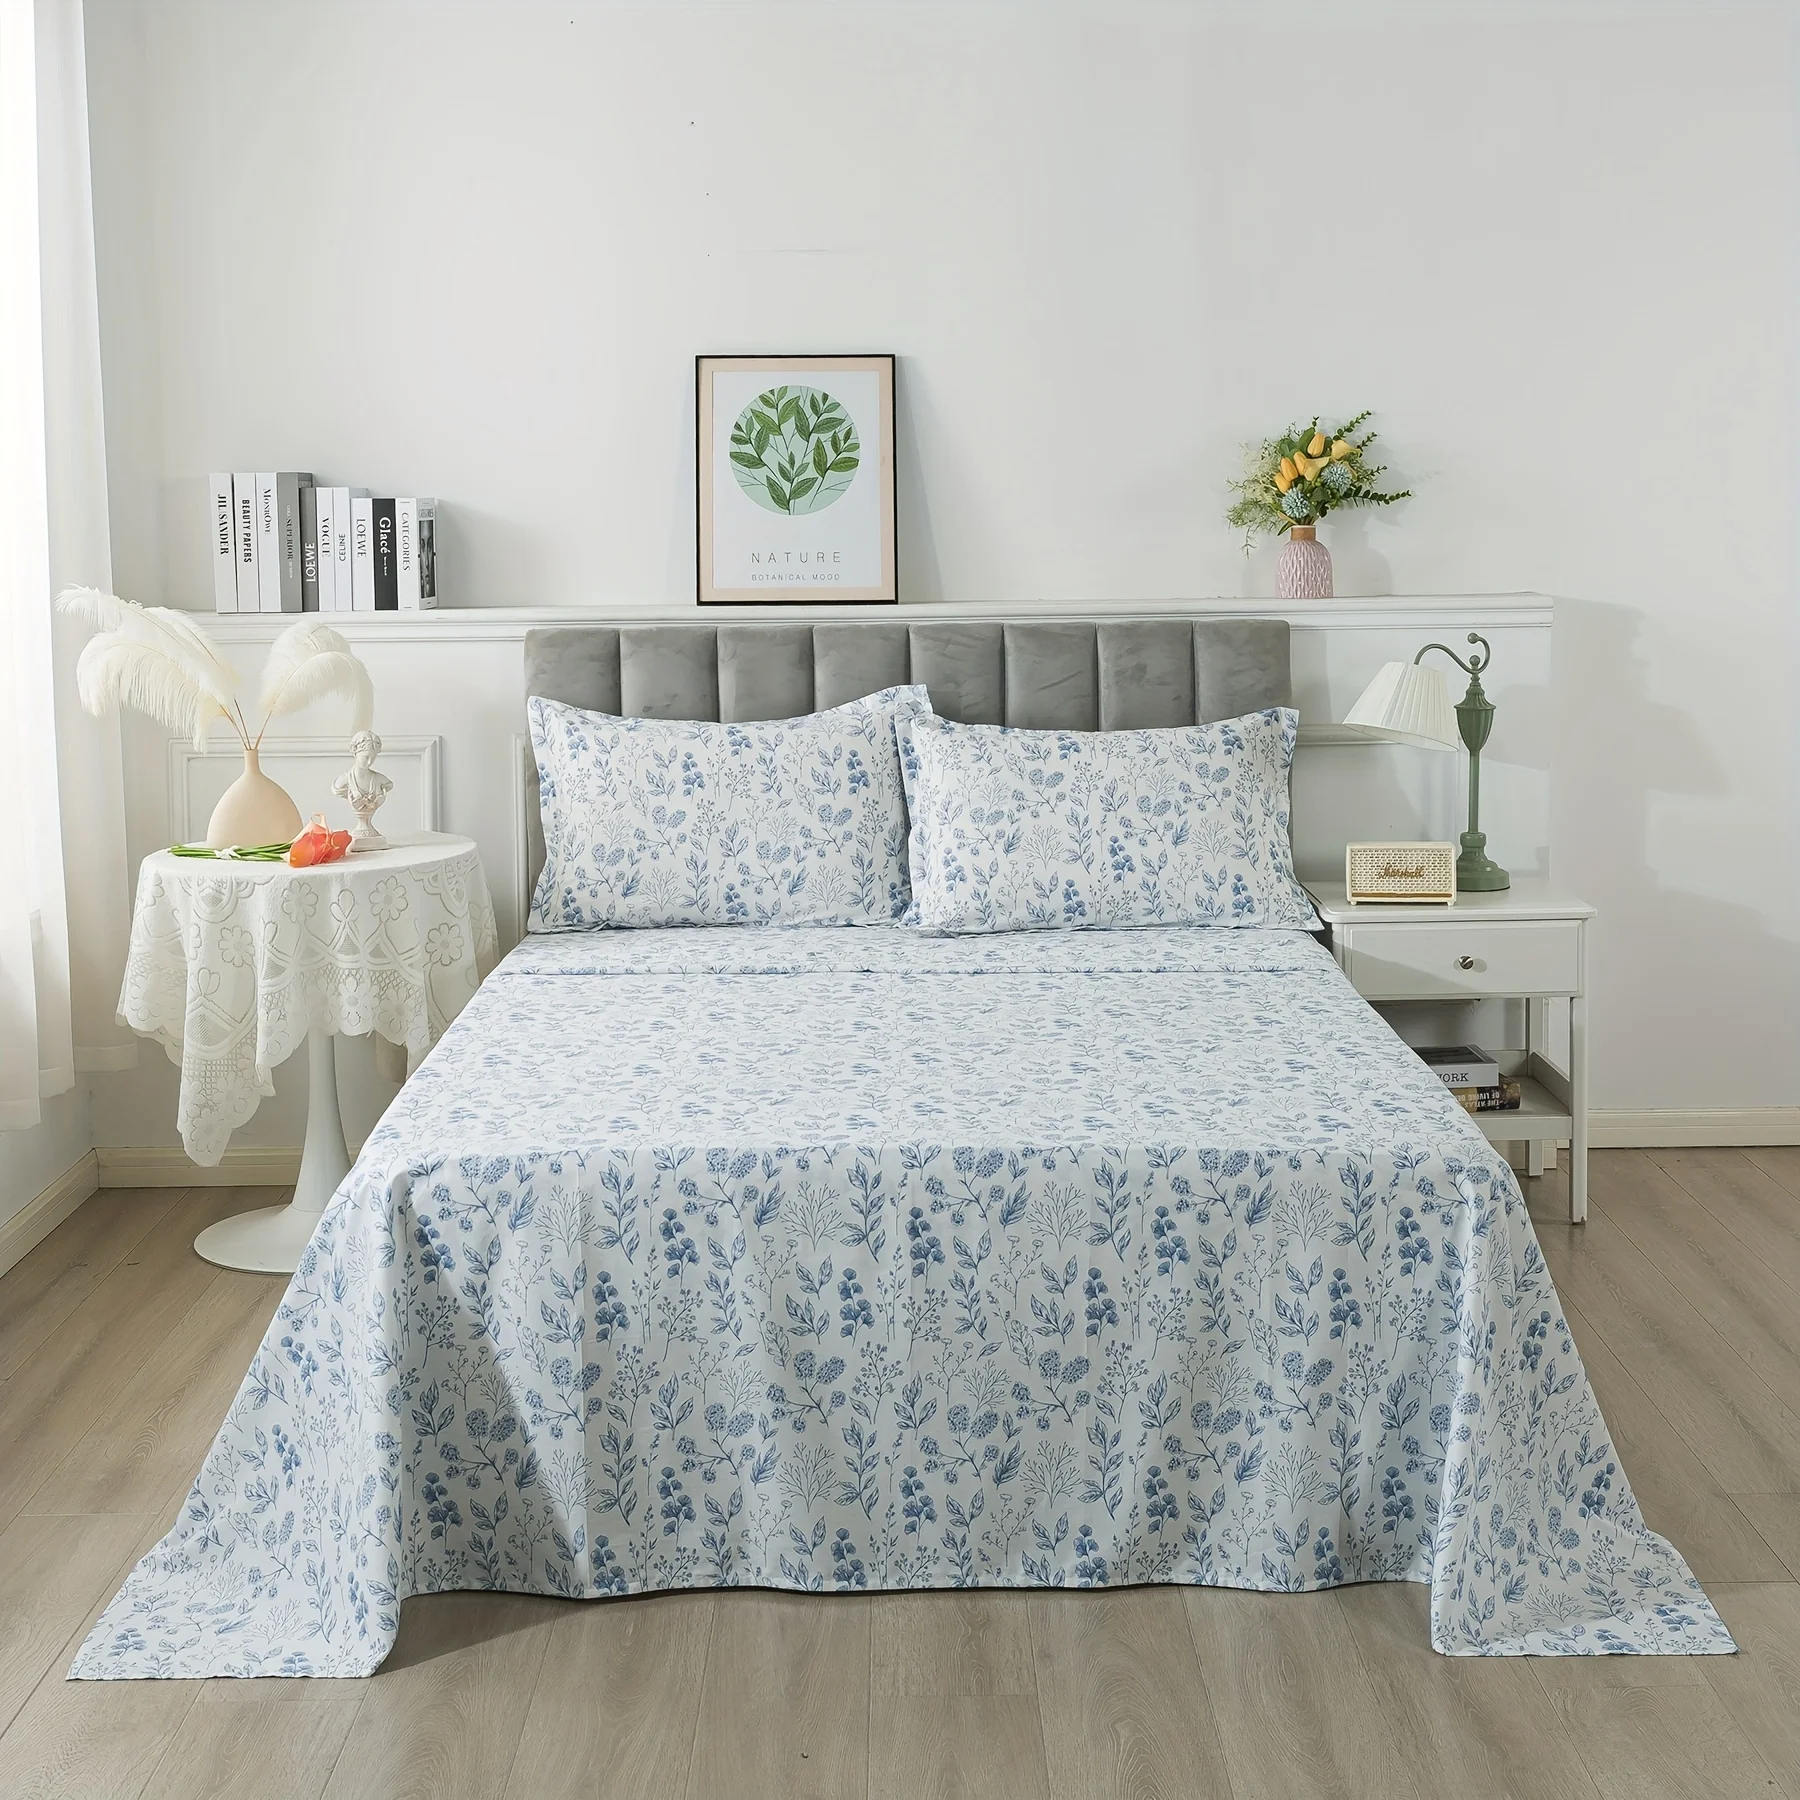 

4pcs 100% Cotton Blue Leaf Print Farmhouse Fitted Sheet Set (1*Flat Sheet + 1* Fitted Sheet + 2*Pillowcases, Without Core), Vint